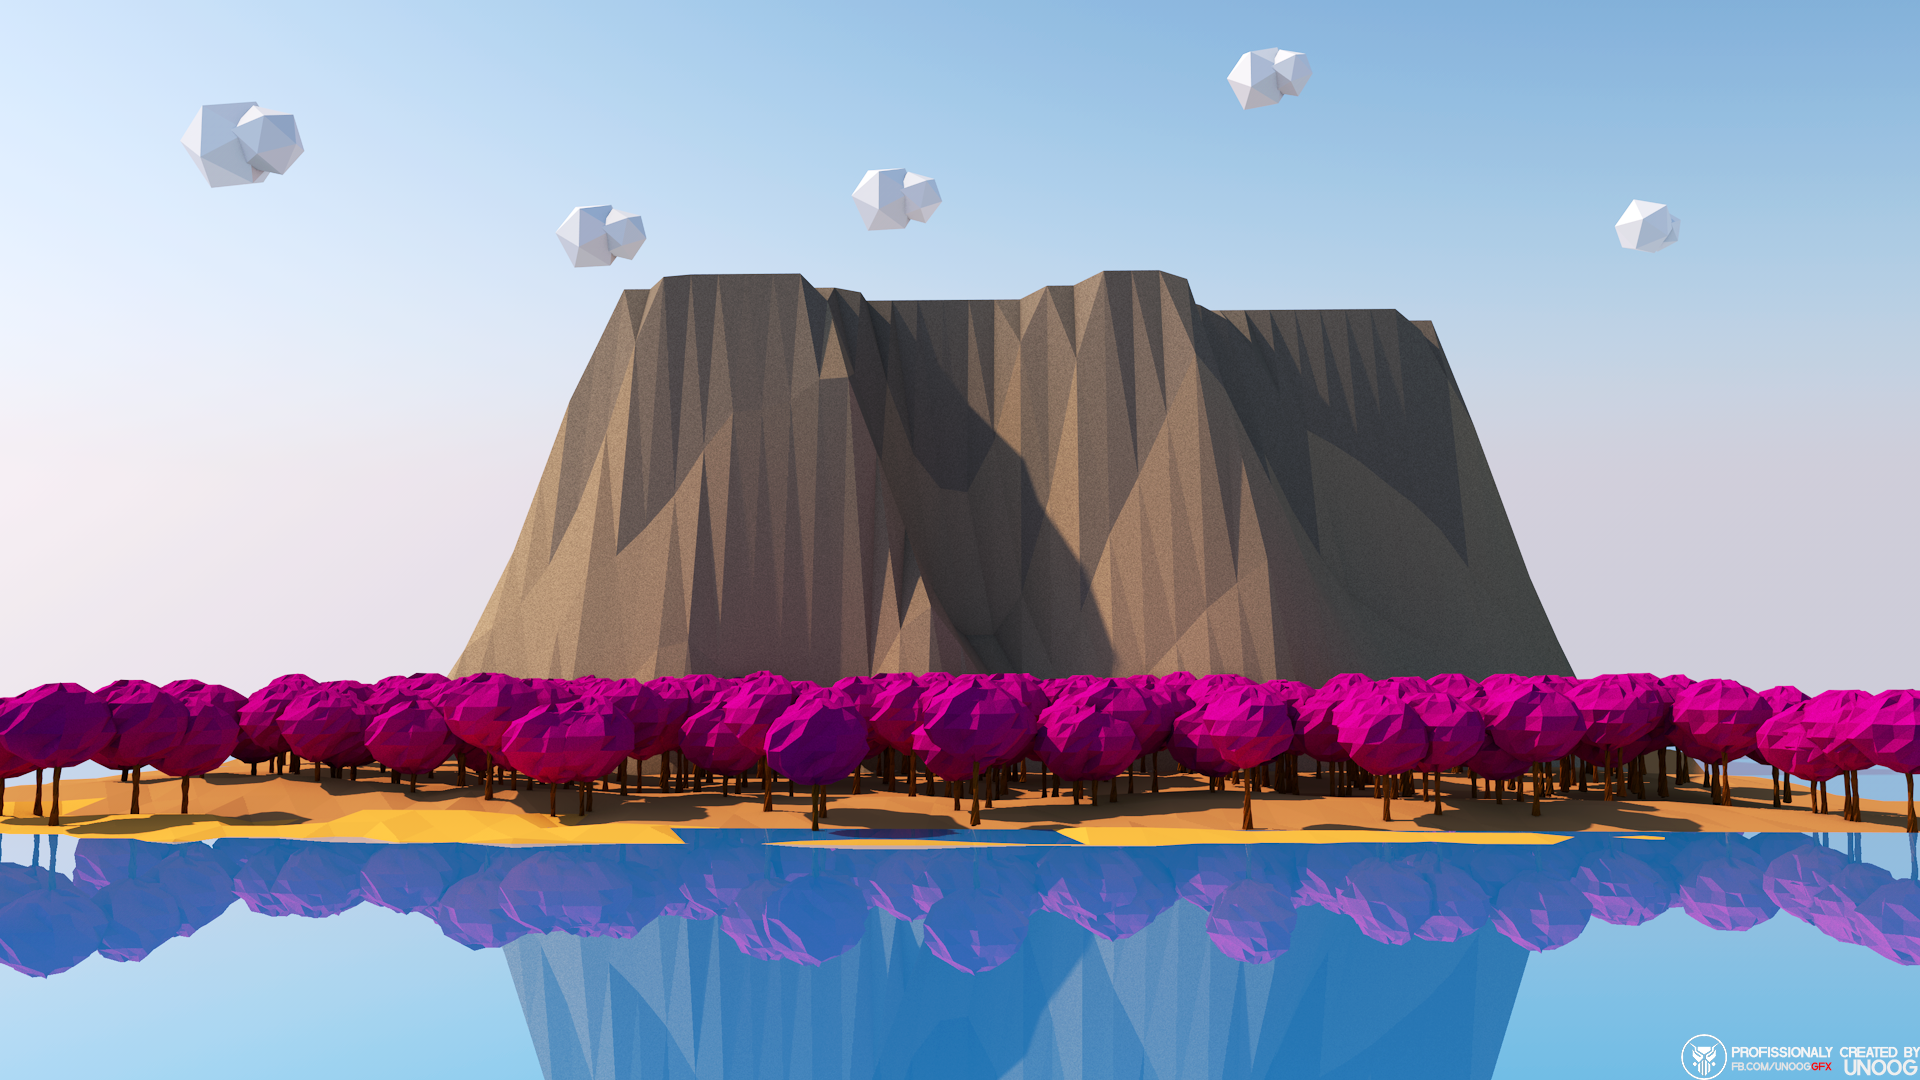 General 1920x1080 low poly trees mountains reflection CGI digital art rocks nature landscape clouds sky water